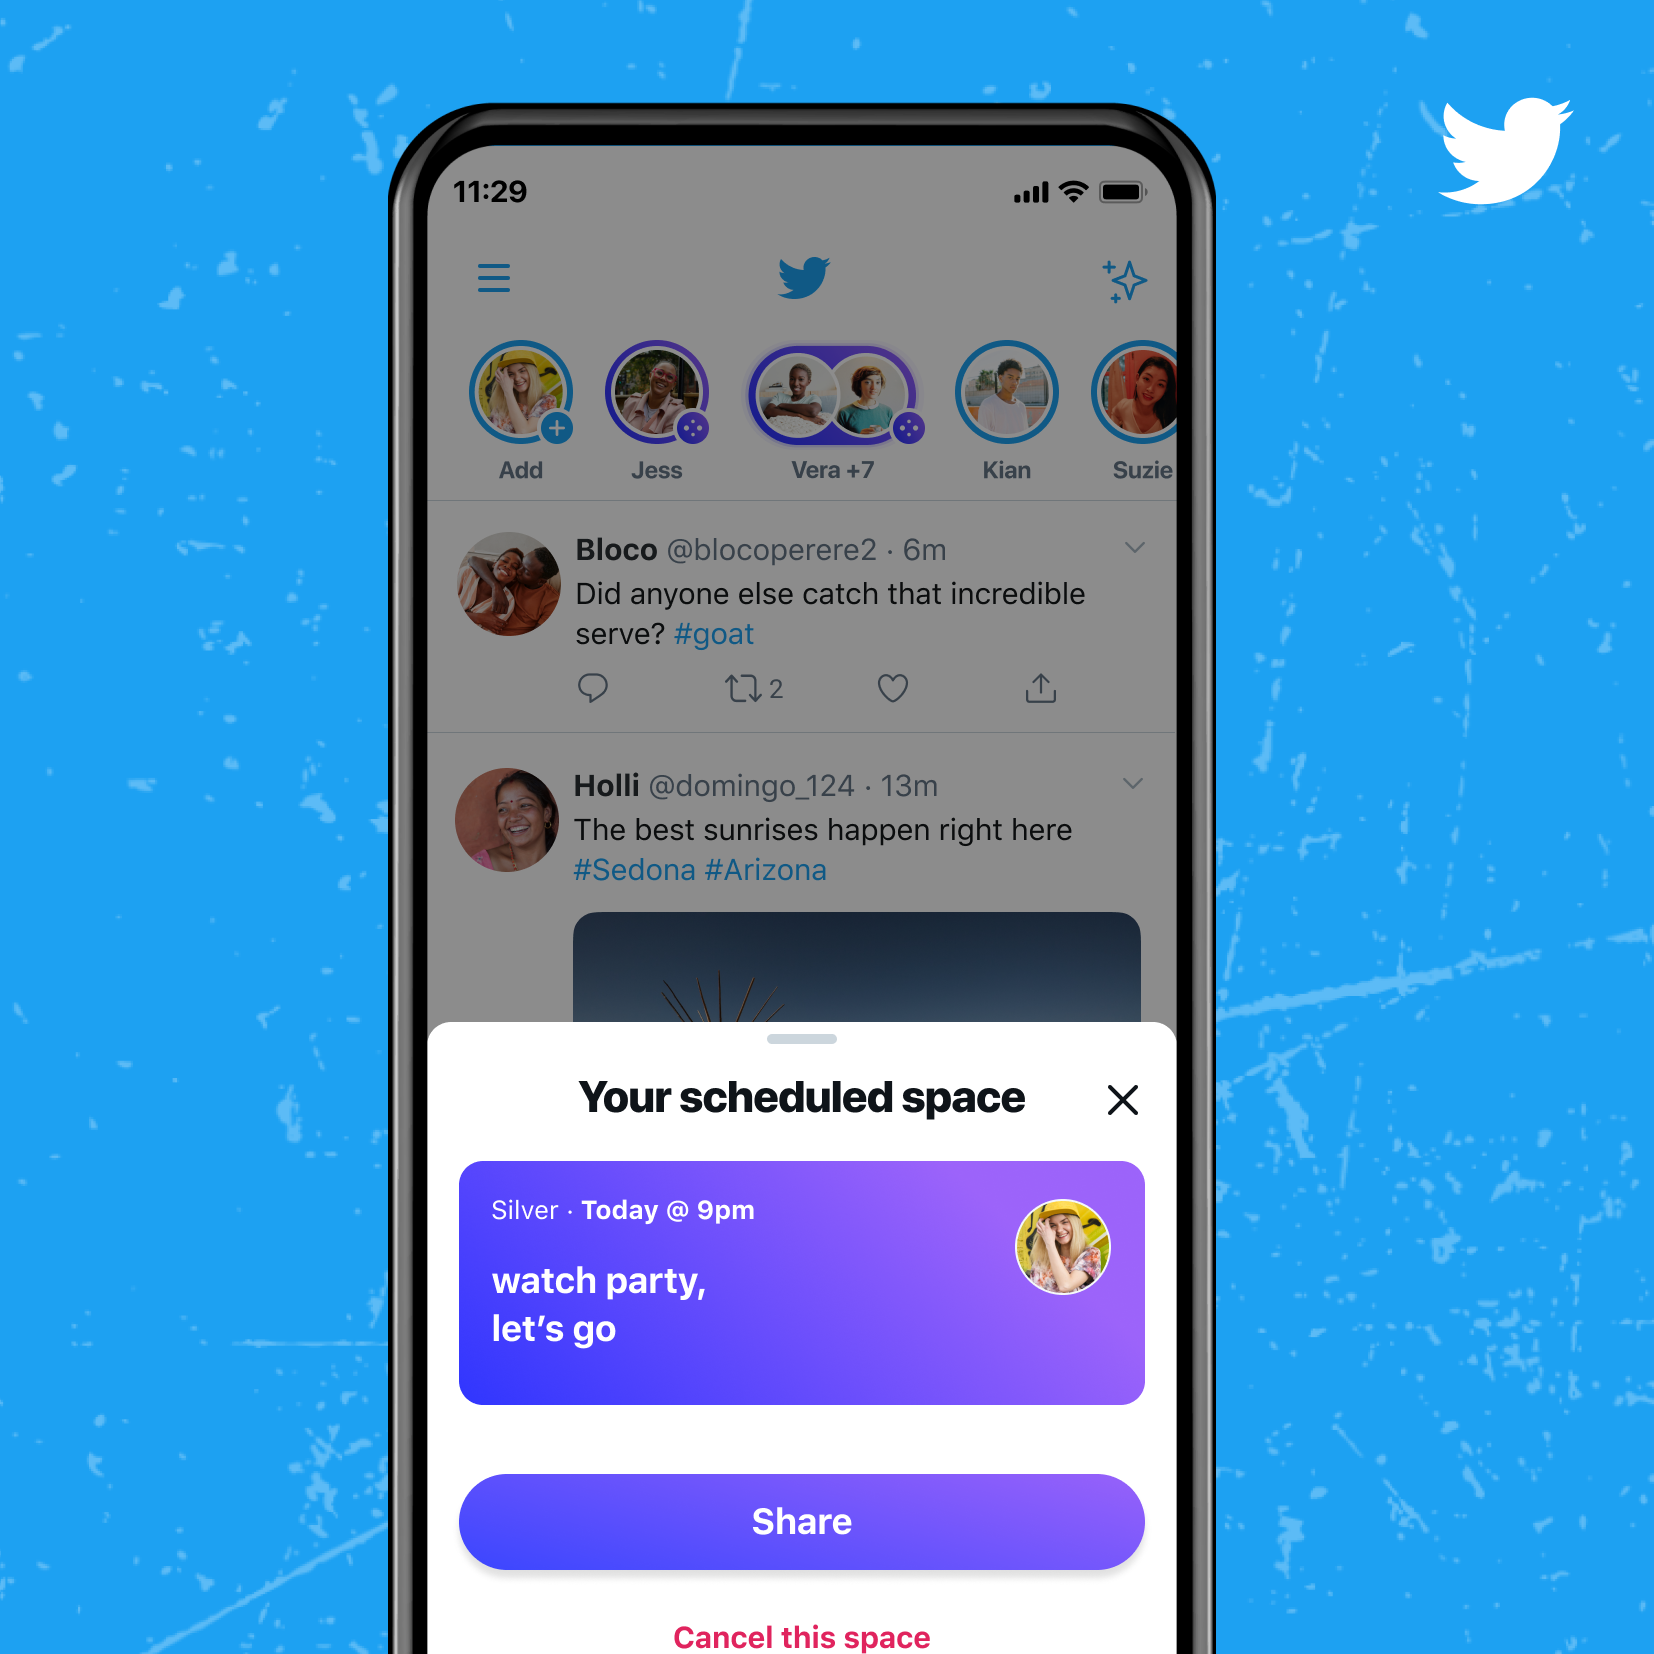 To catch up with our faves, the users will be able to schedule and set reminders for upcoming Twitter Spaces in the coming weeks.